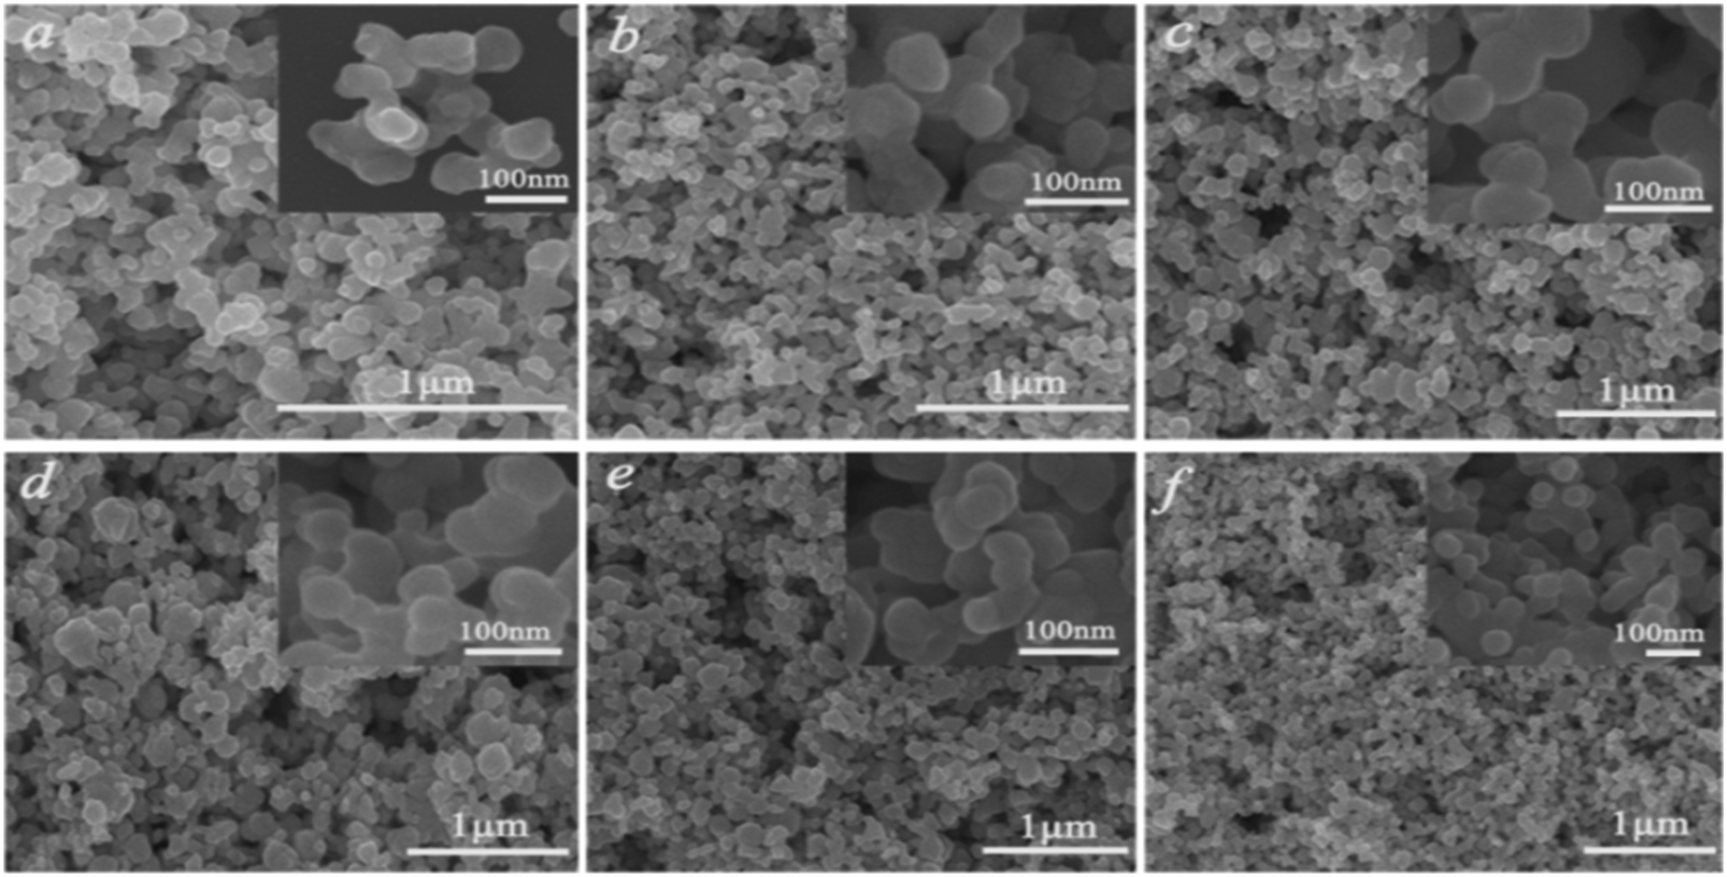 Room Temperature Ultrafast Synthesis Morphology And Upconversion Luminescence Of K 0 3 Bi 0 7 F 2 4 Yb 3 Er 3 Nanoparticles For Temperature Sensi Crystengcomm Rsc Publishing Doi 10 1039 D0cea